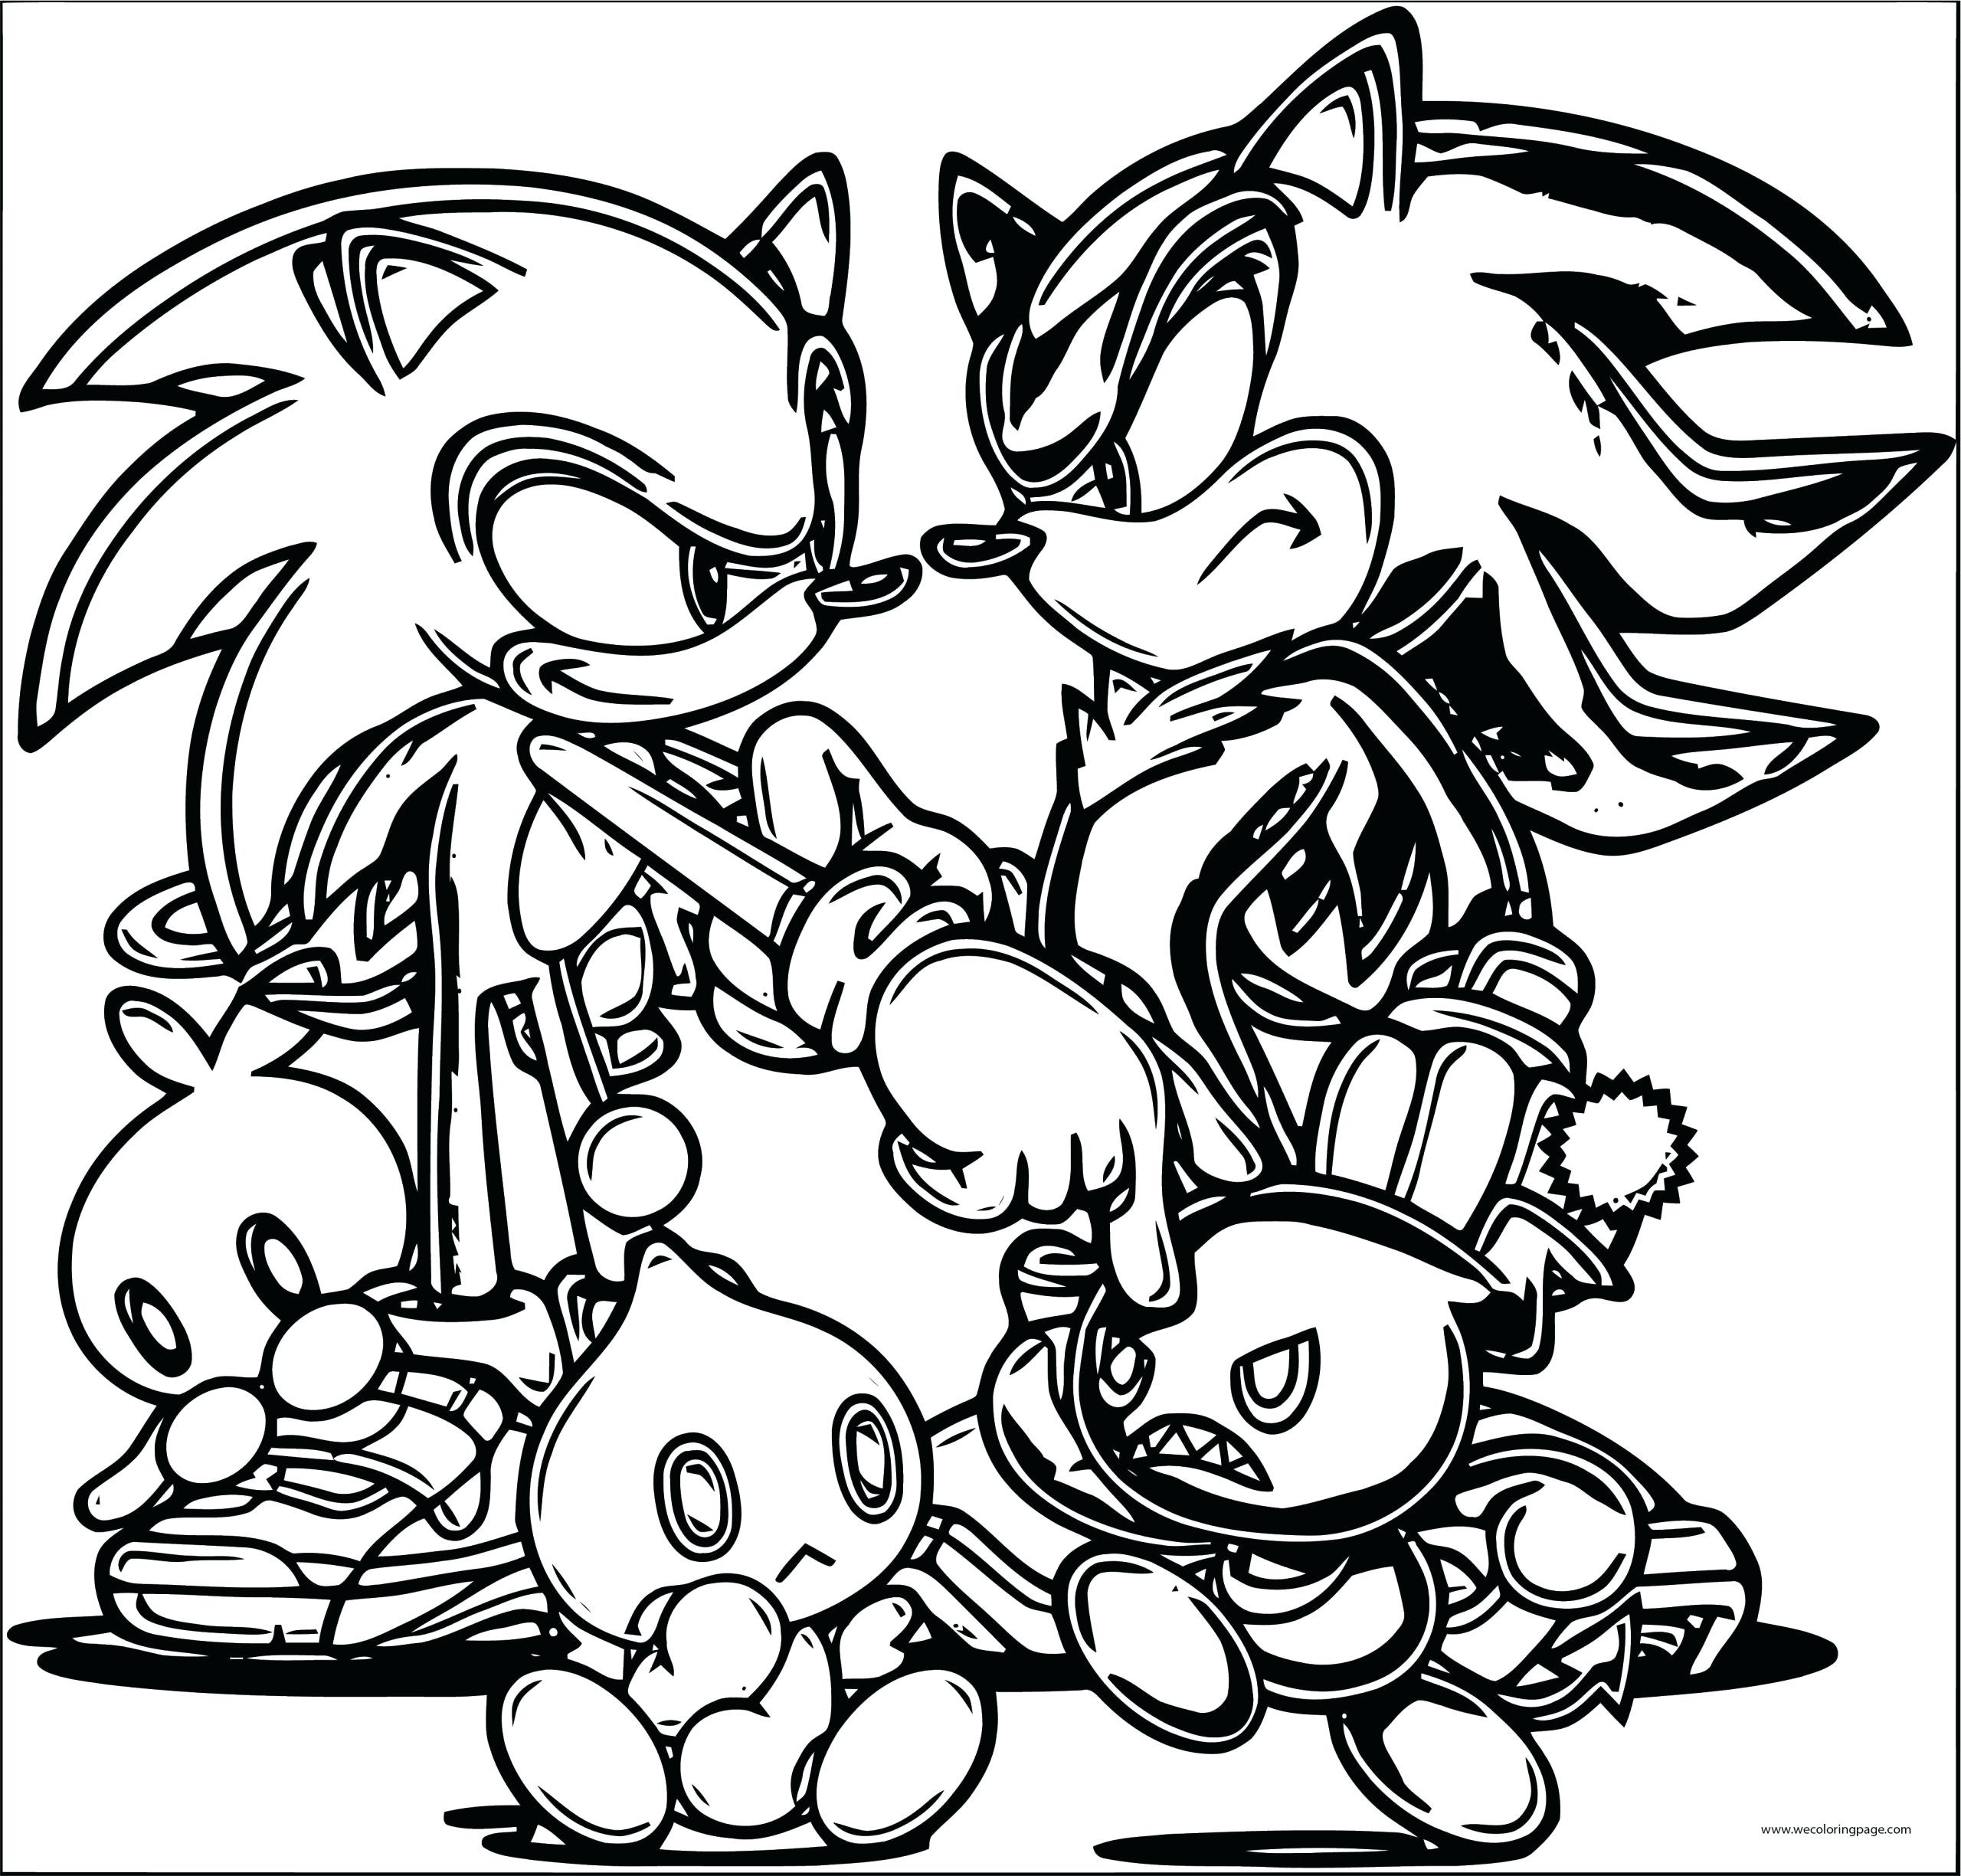 coloring pages : Sonic And Tails Colouring Pages Elegant Super Sonic And  Super Shadow Coloring Pages – Bdennis Sonic and Tails Colouring Pages ~  affiliateprogrambook.com